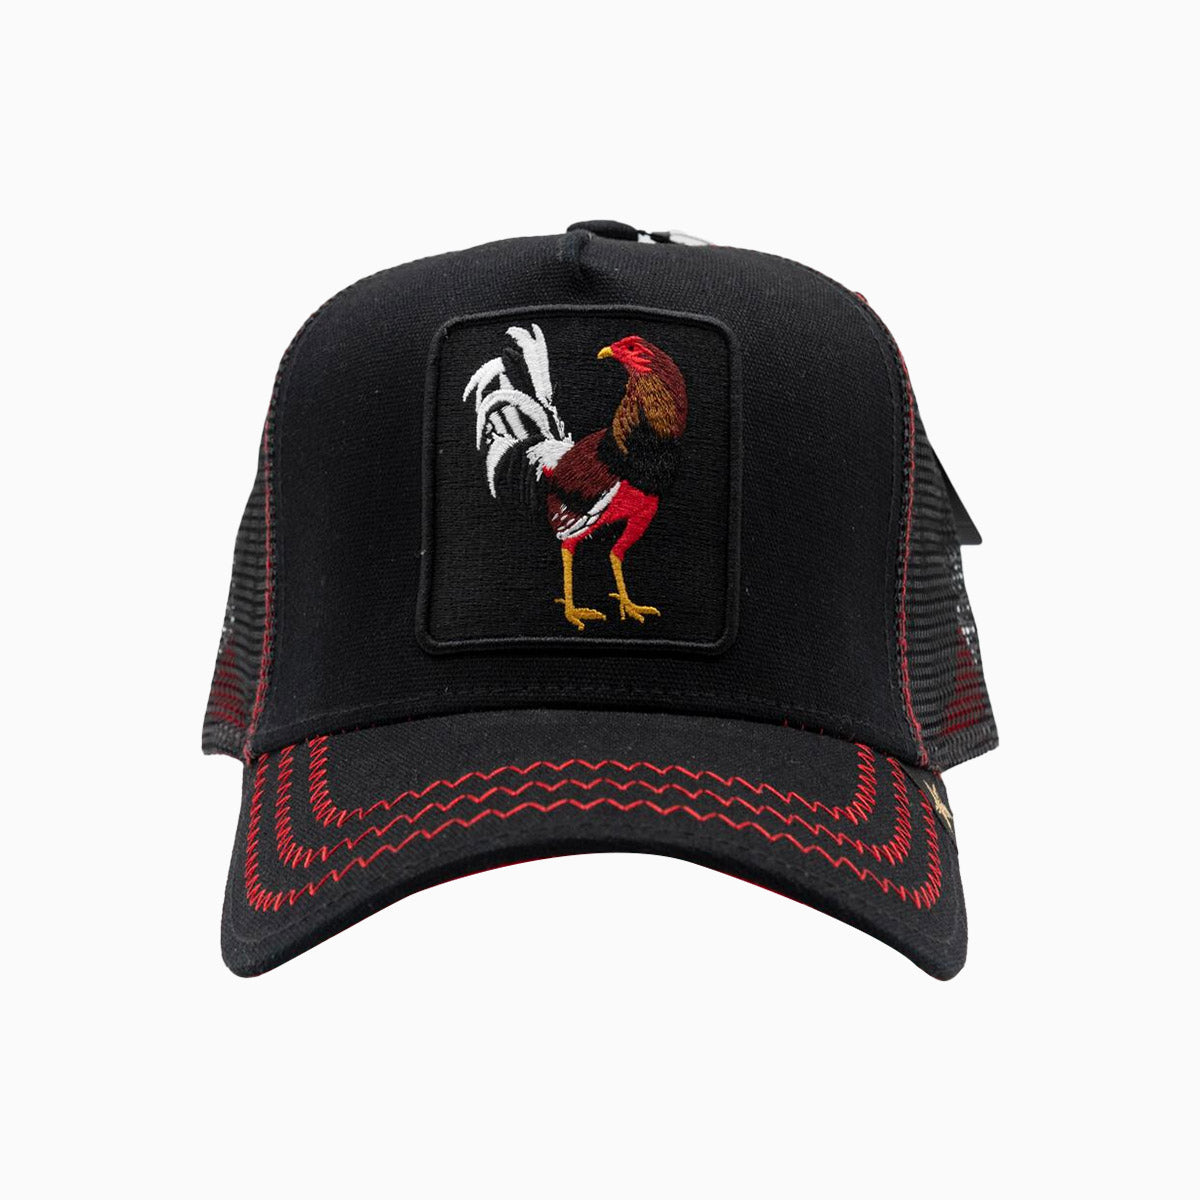 gold-star-hats-the-rooster-black-red-trucker-hat-gs1013-black